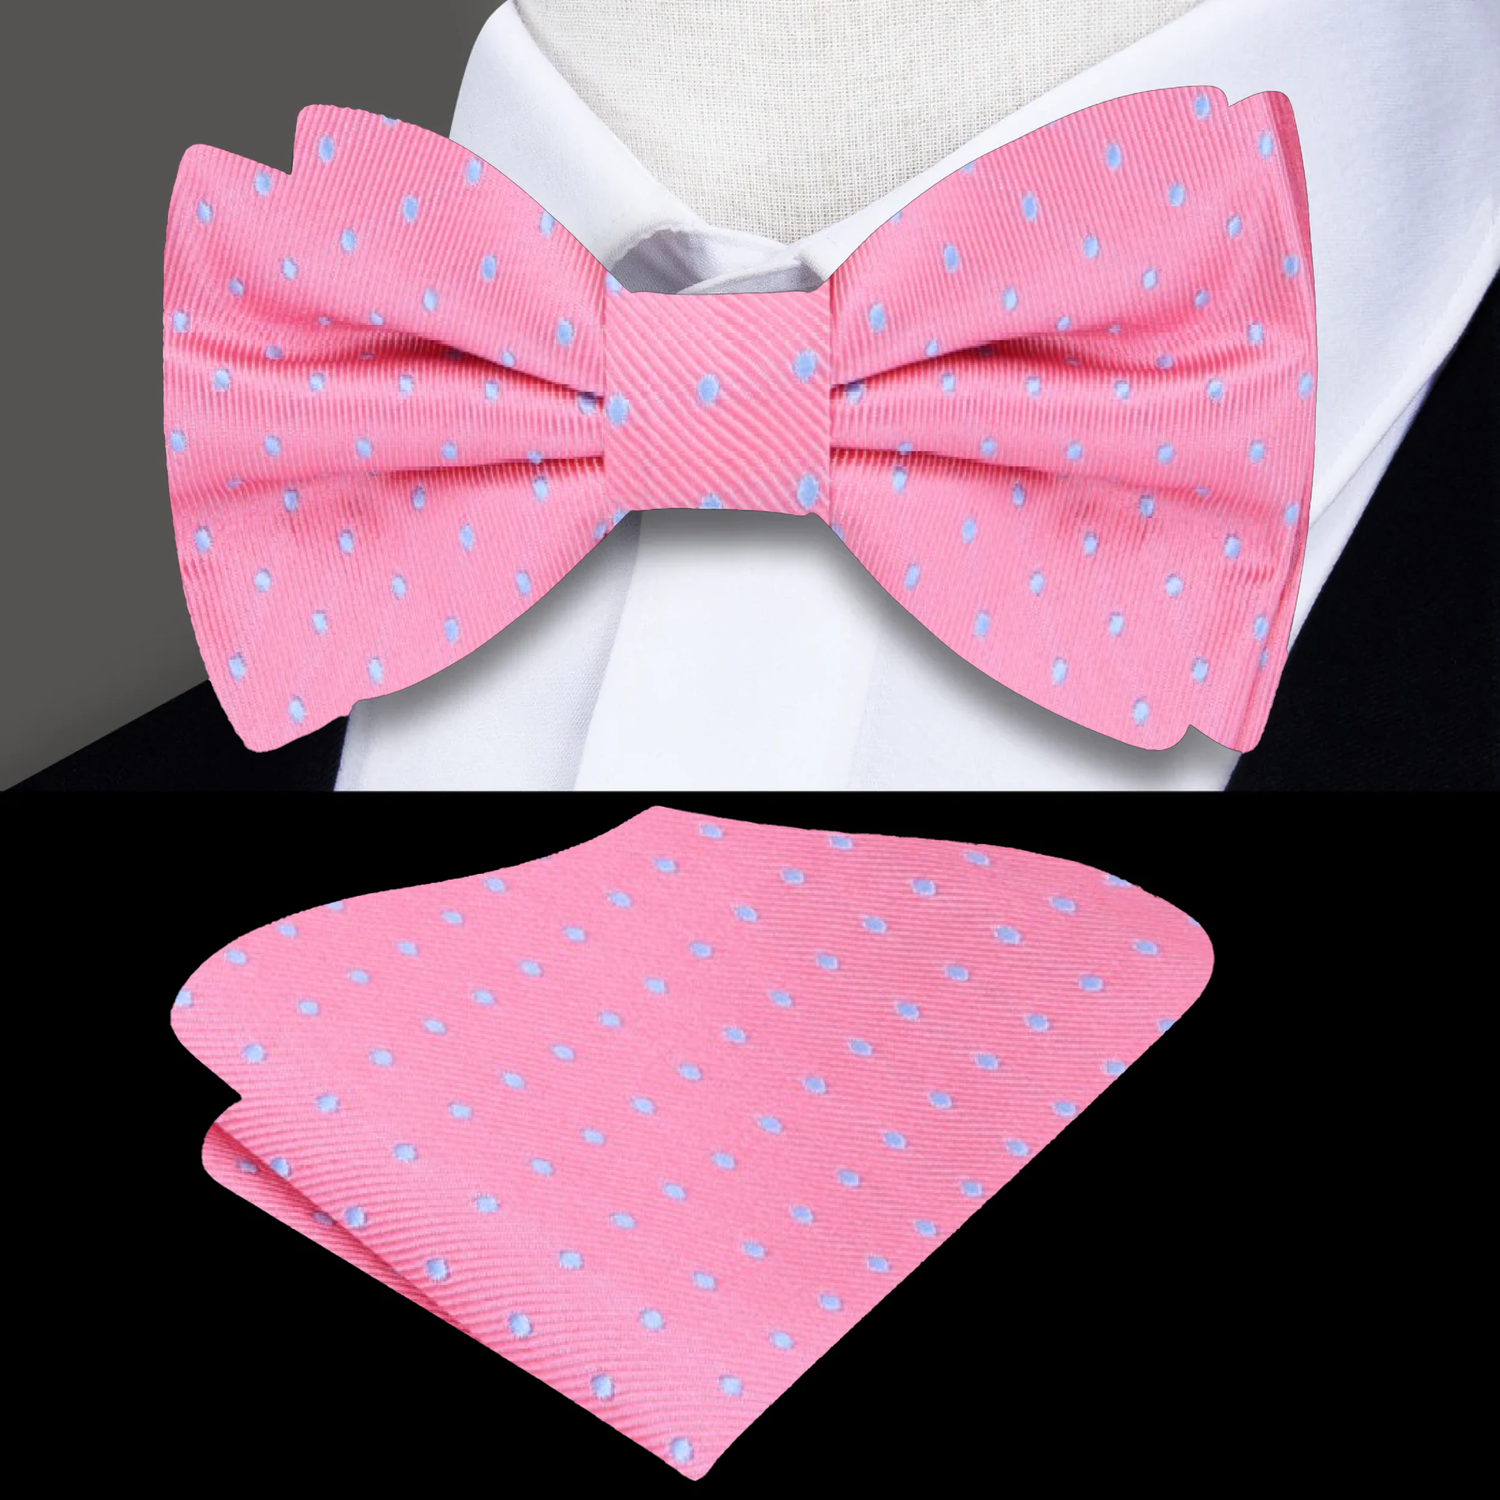 Gumball Pink, Rich Light Blue Polka Dots Bow Tie and Pocket Square